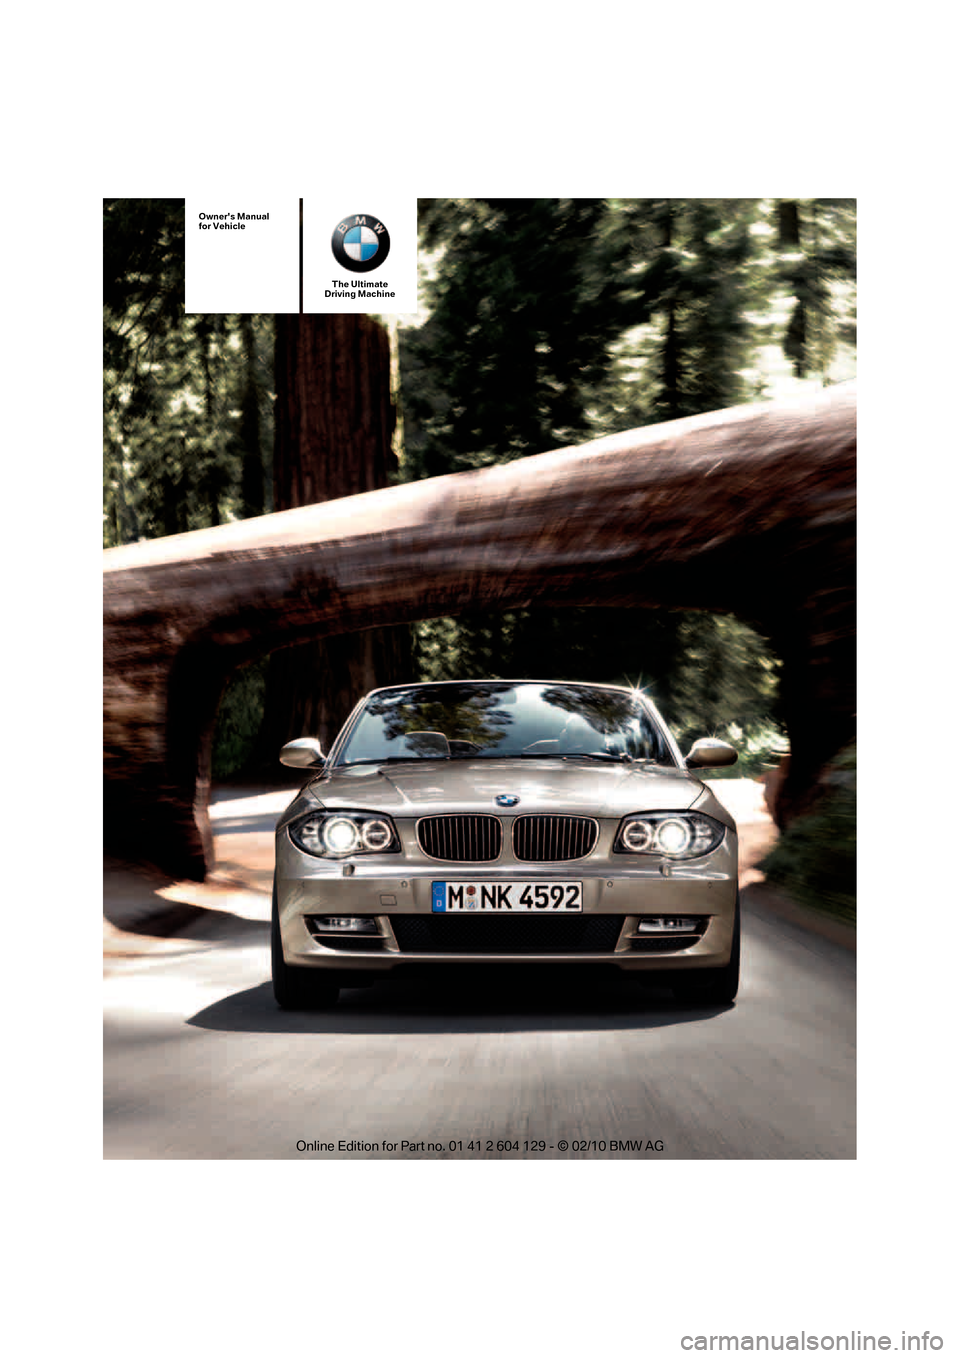 BMW 128I CONVERTIBLE 2011 E88 Owners Manual The Ultimate
Driving Machine
Owners Manual
for Vehicle 